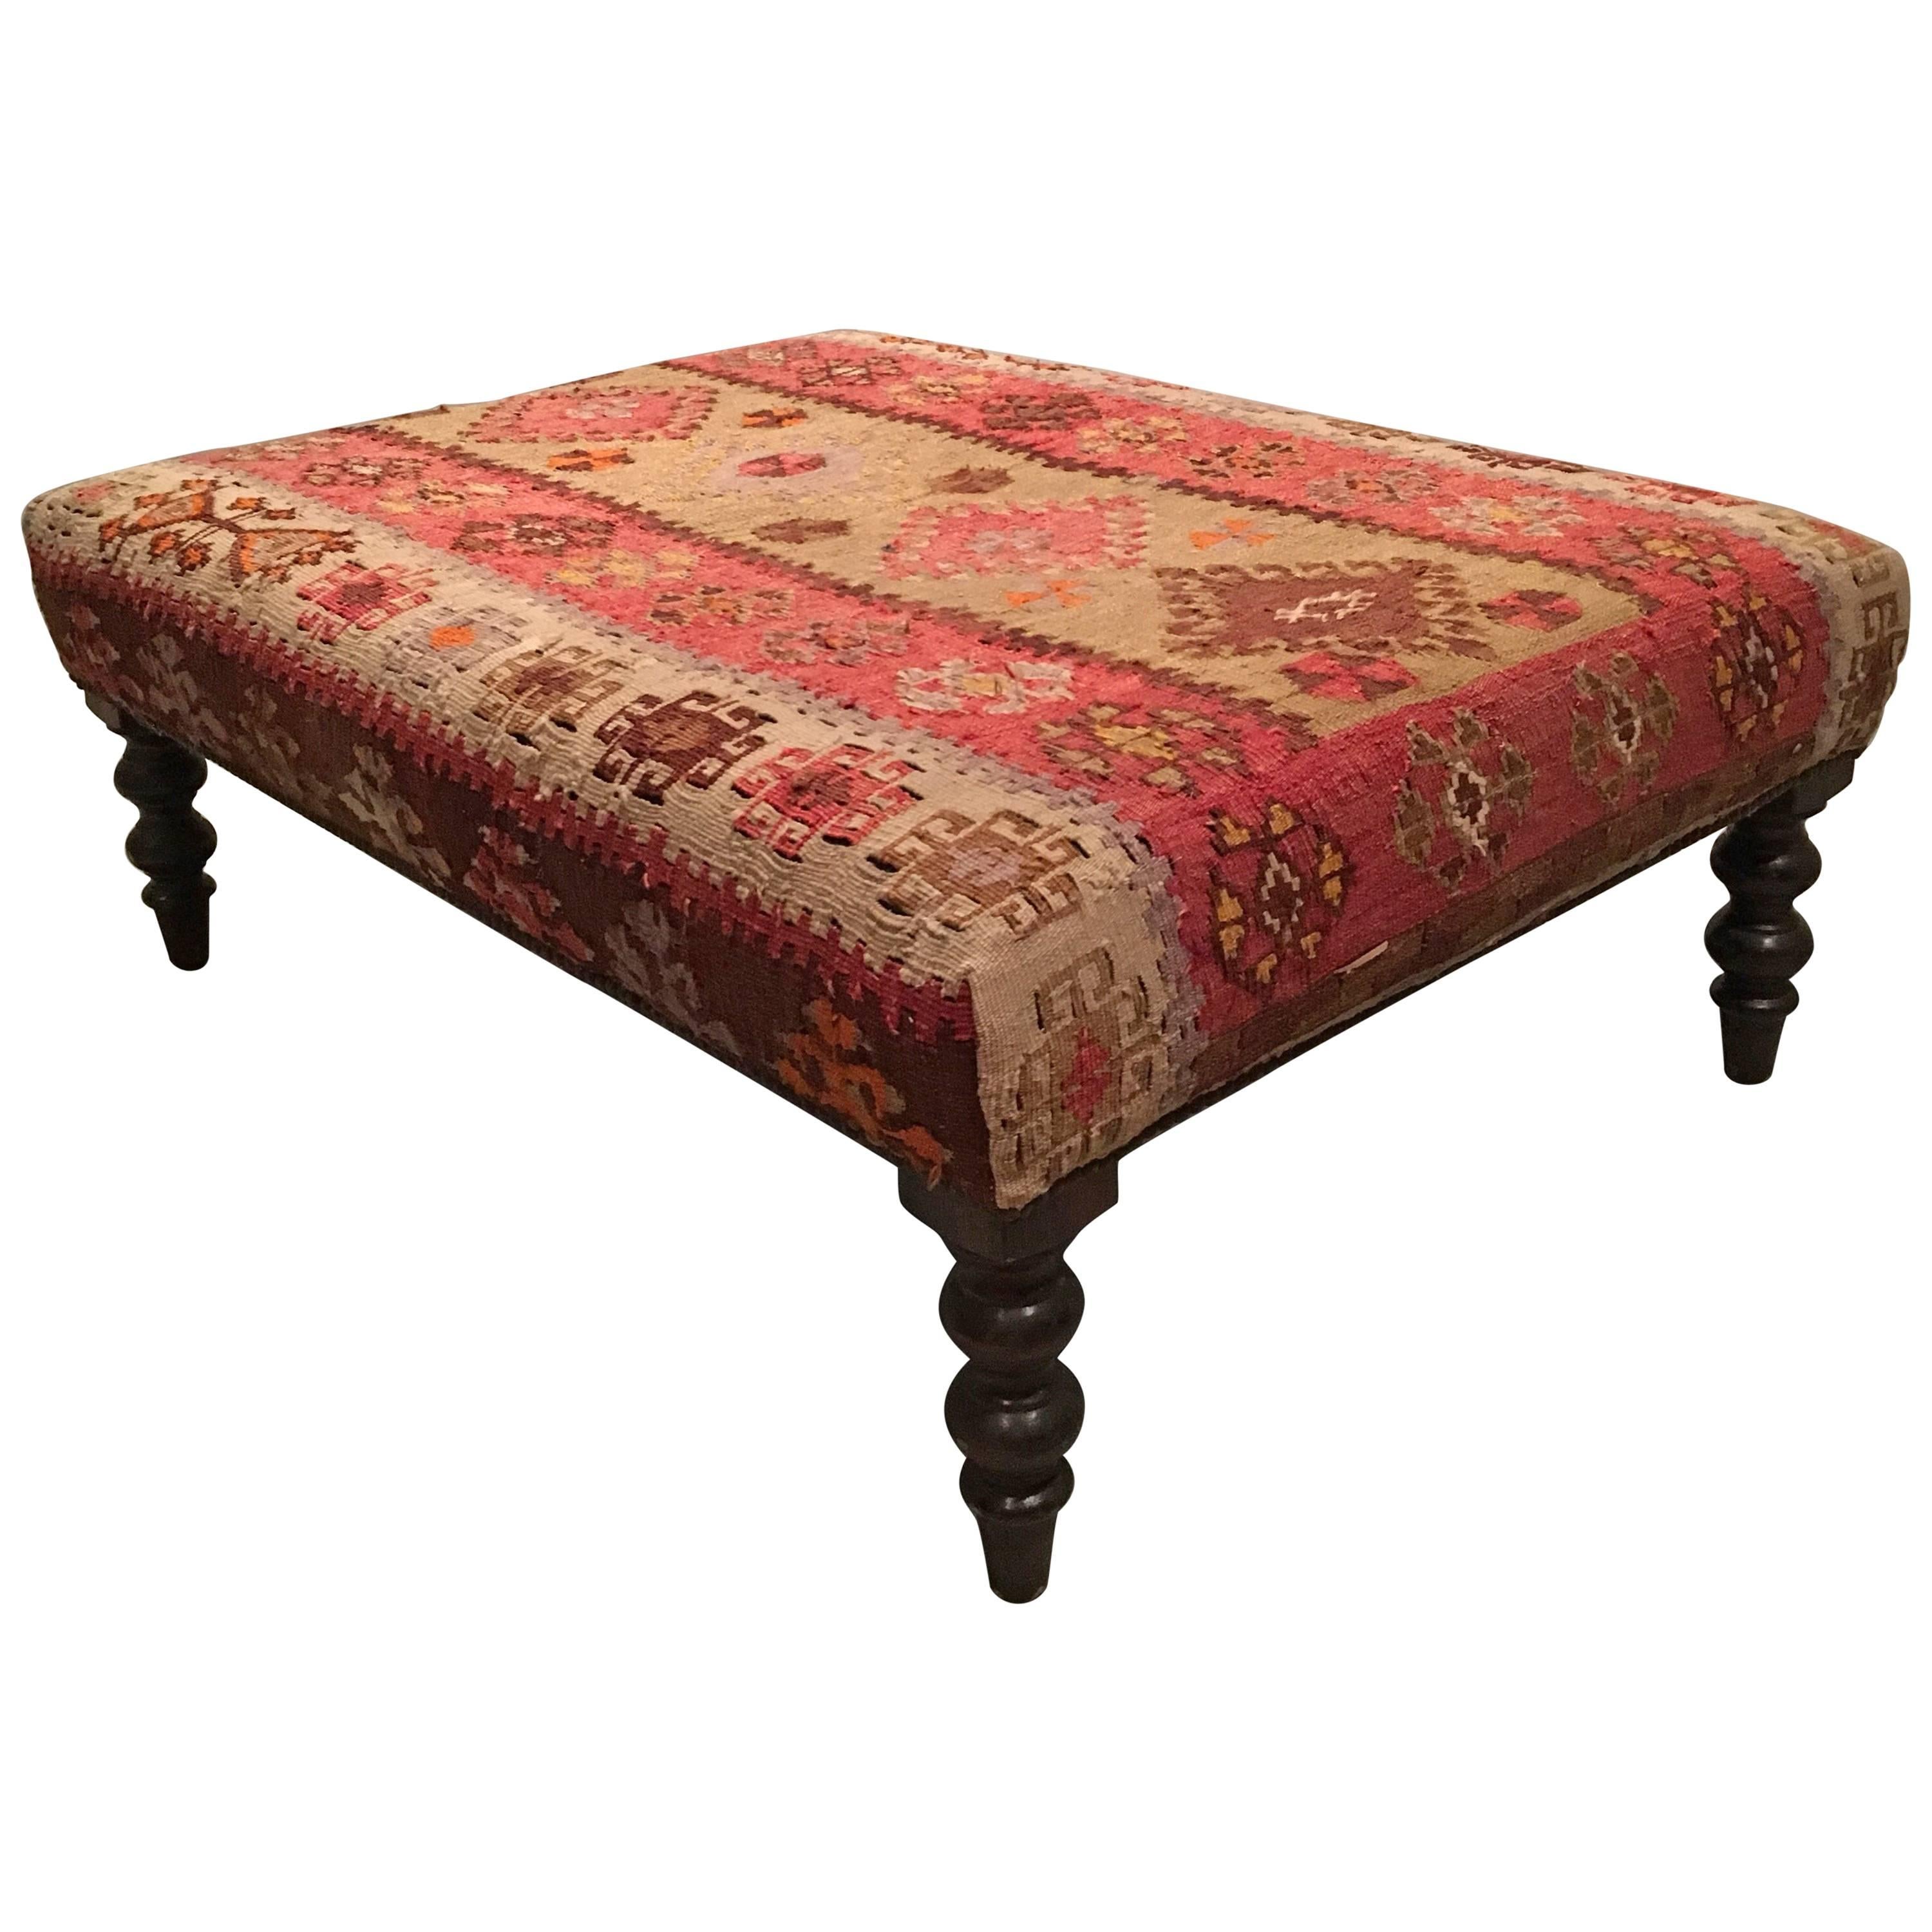 Hare and Poppies Rectangular Footstool MIN2132 